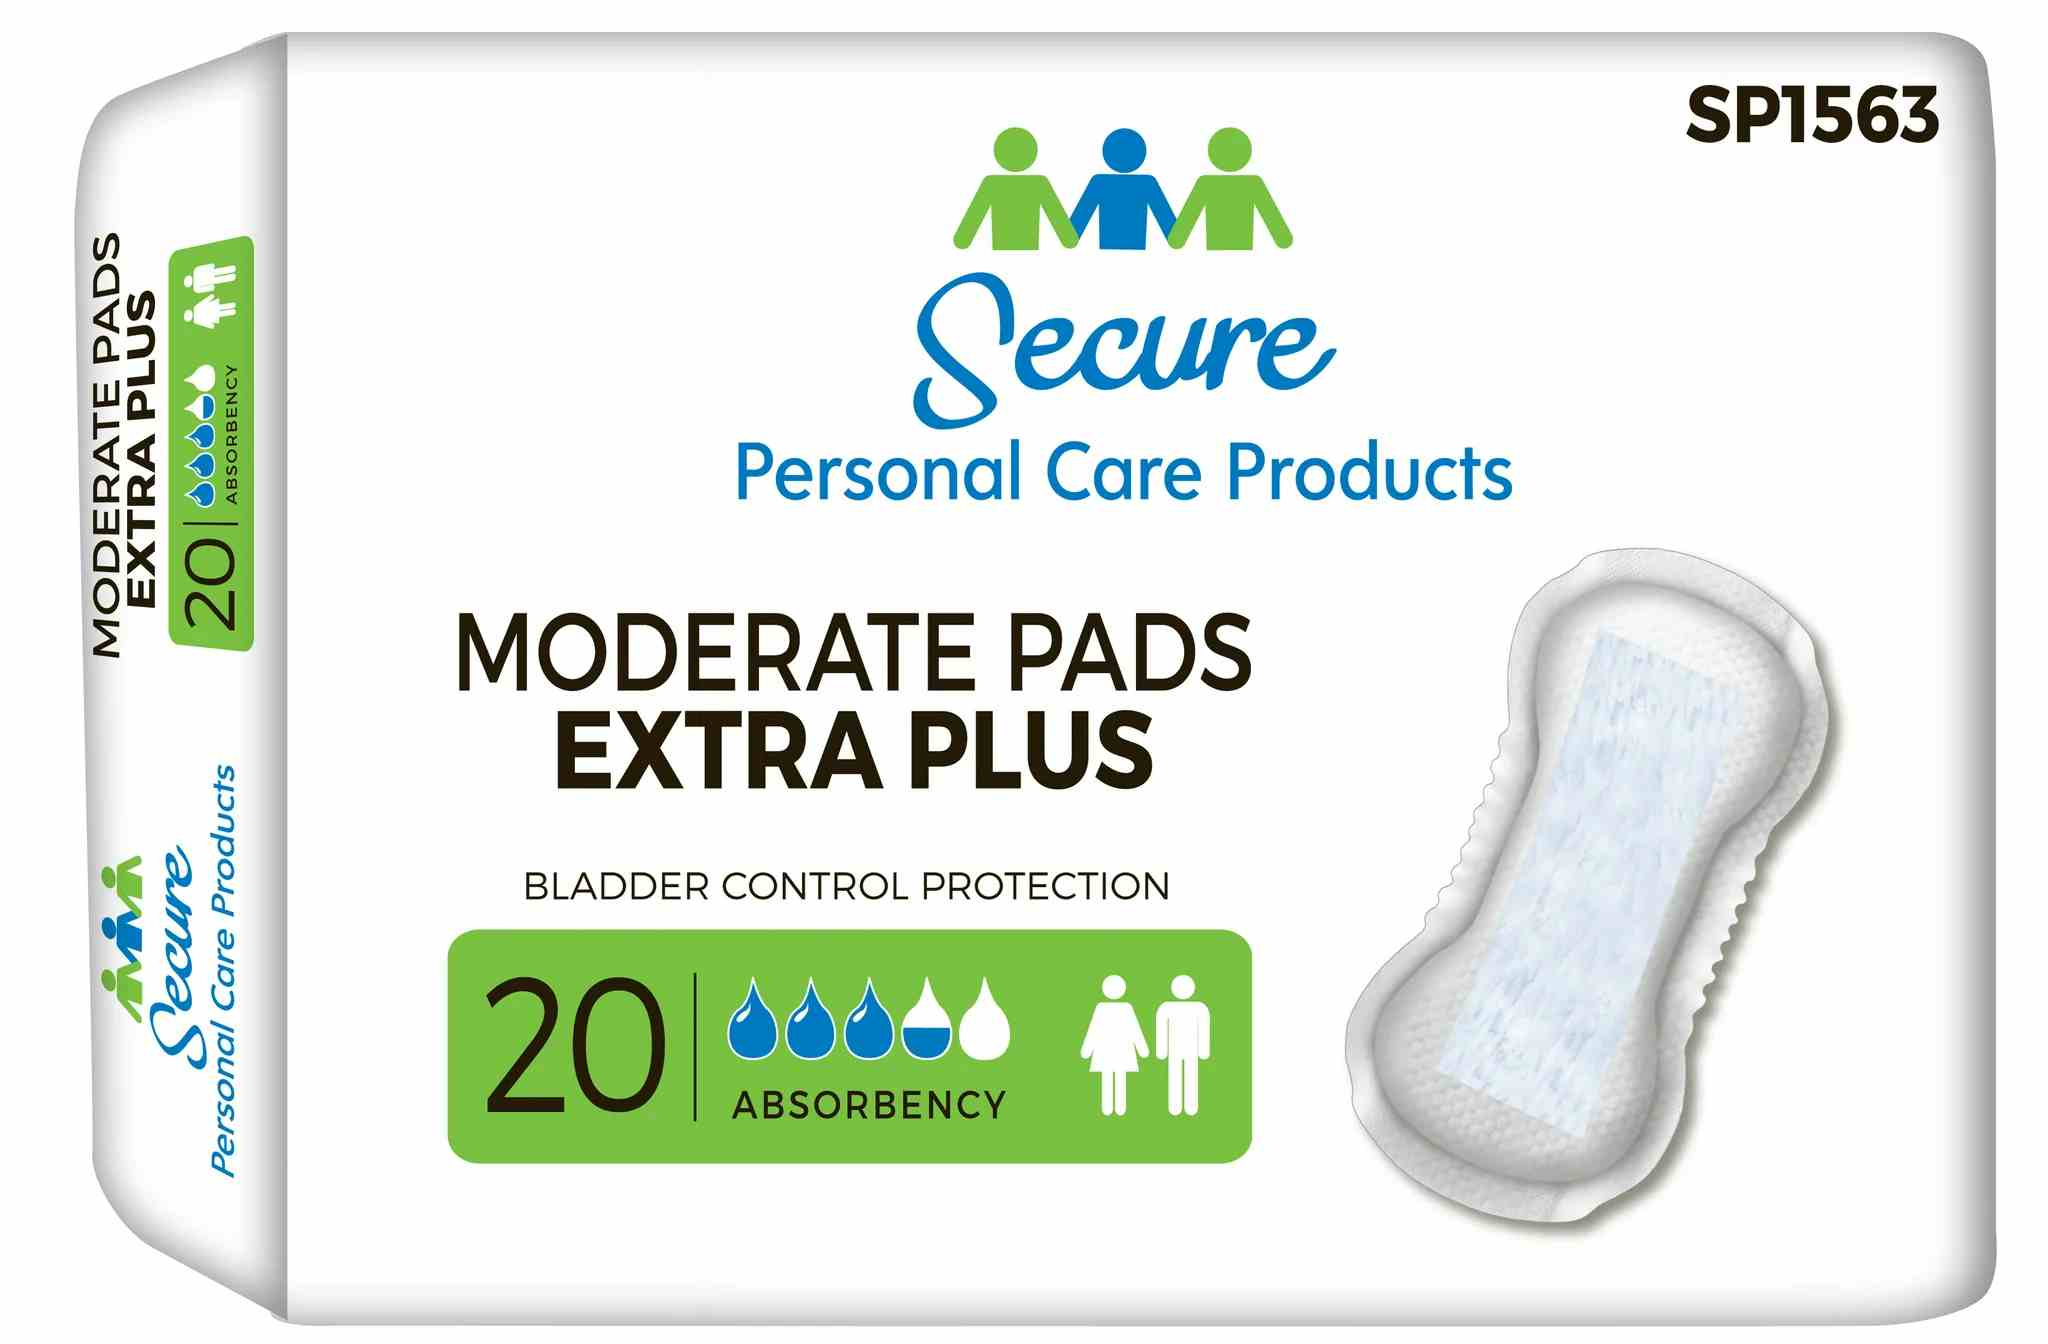 Secure Personal Care Products Moderate Bladder Control Pads Extra Plus, SP1563, Bag of 20